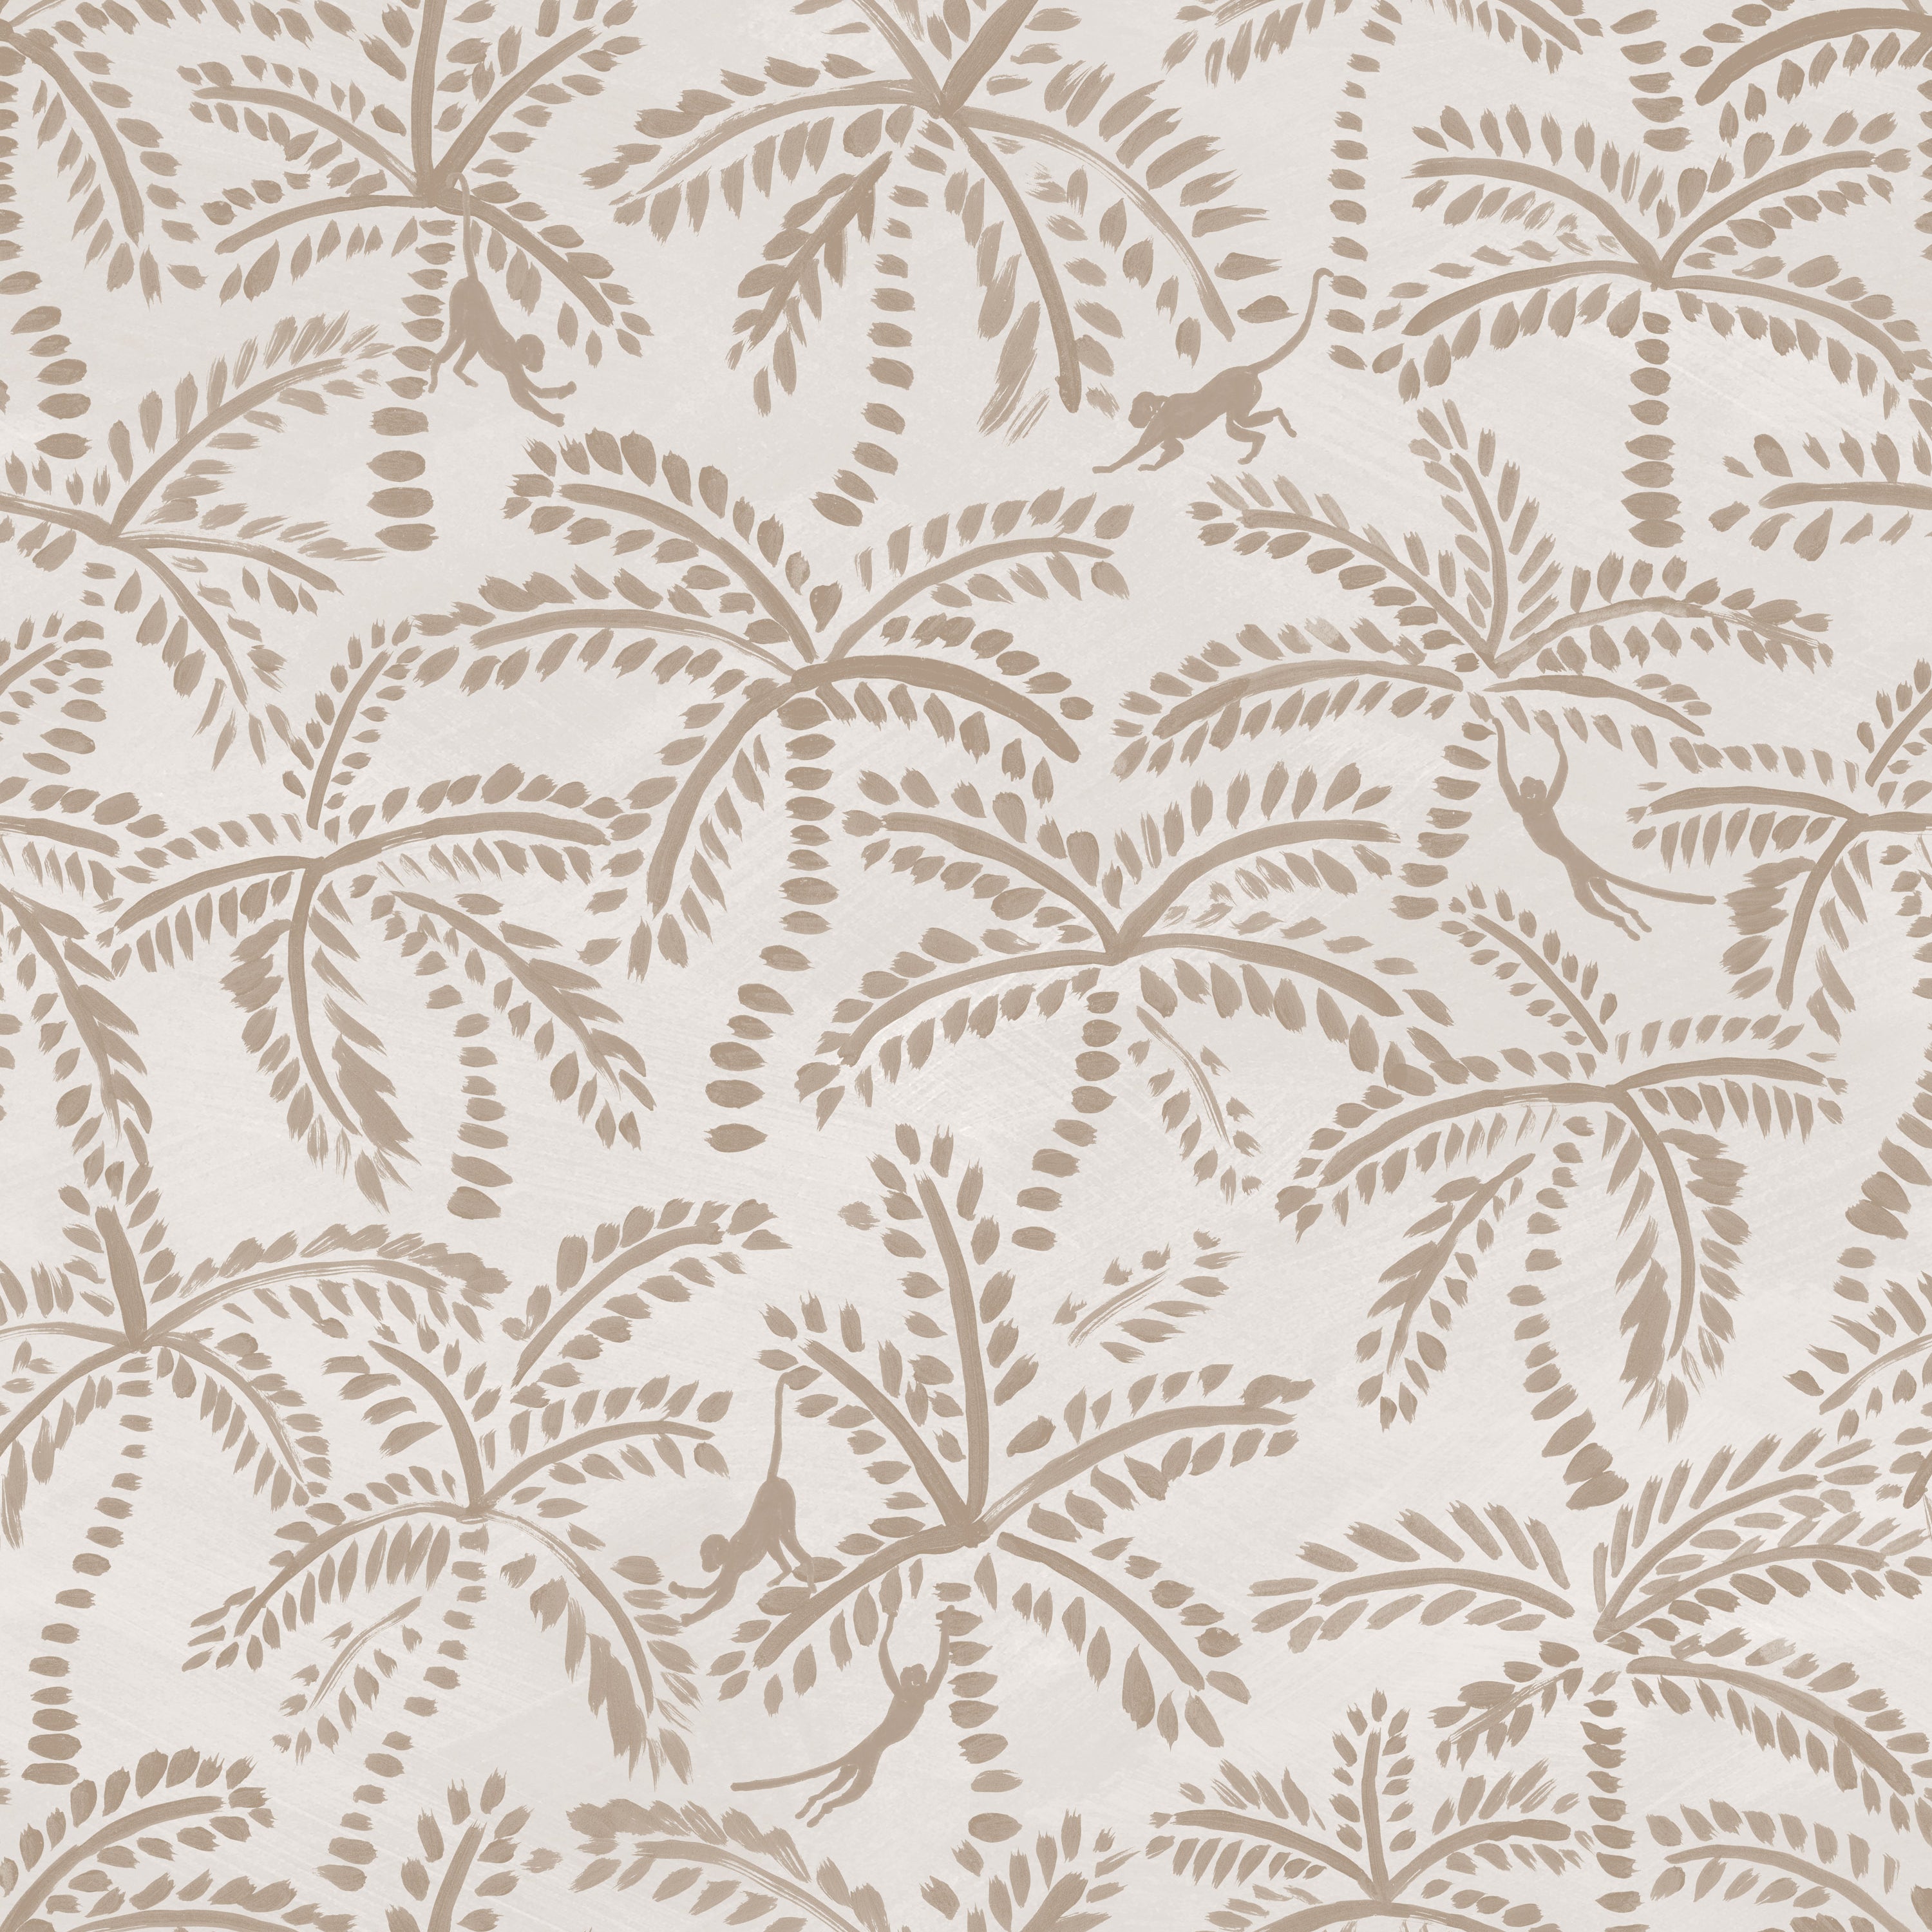 Detail of wallpaper in a playful palm tree and monkey print in tan on a cream field.